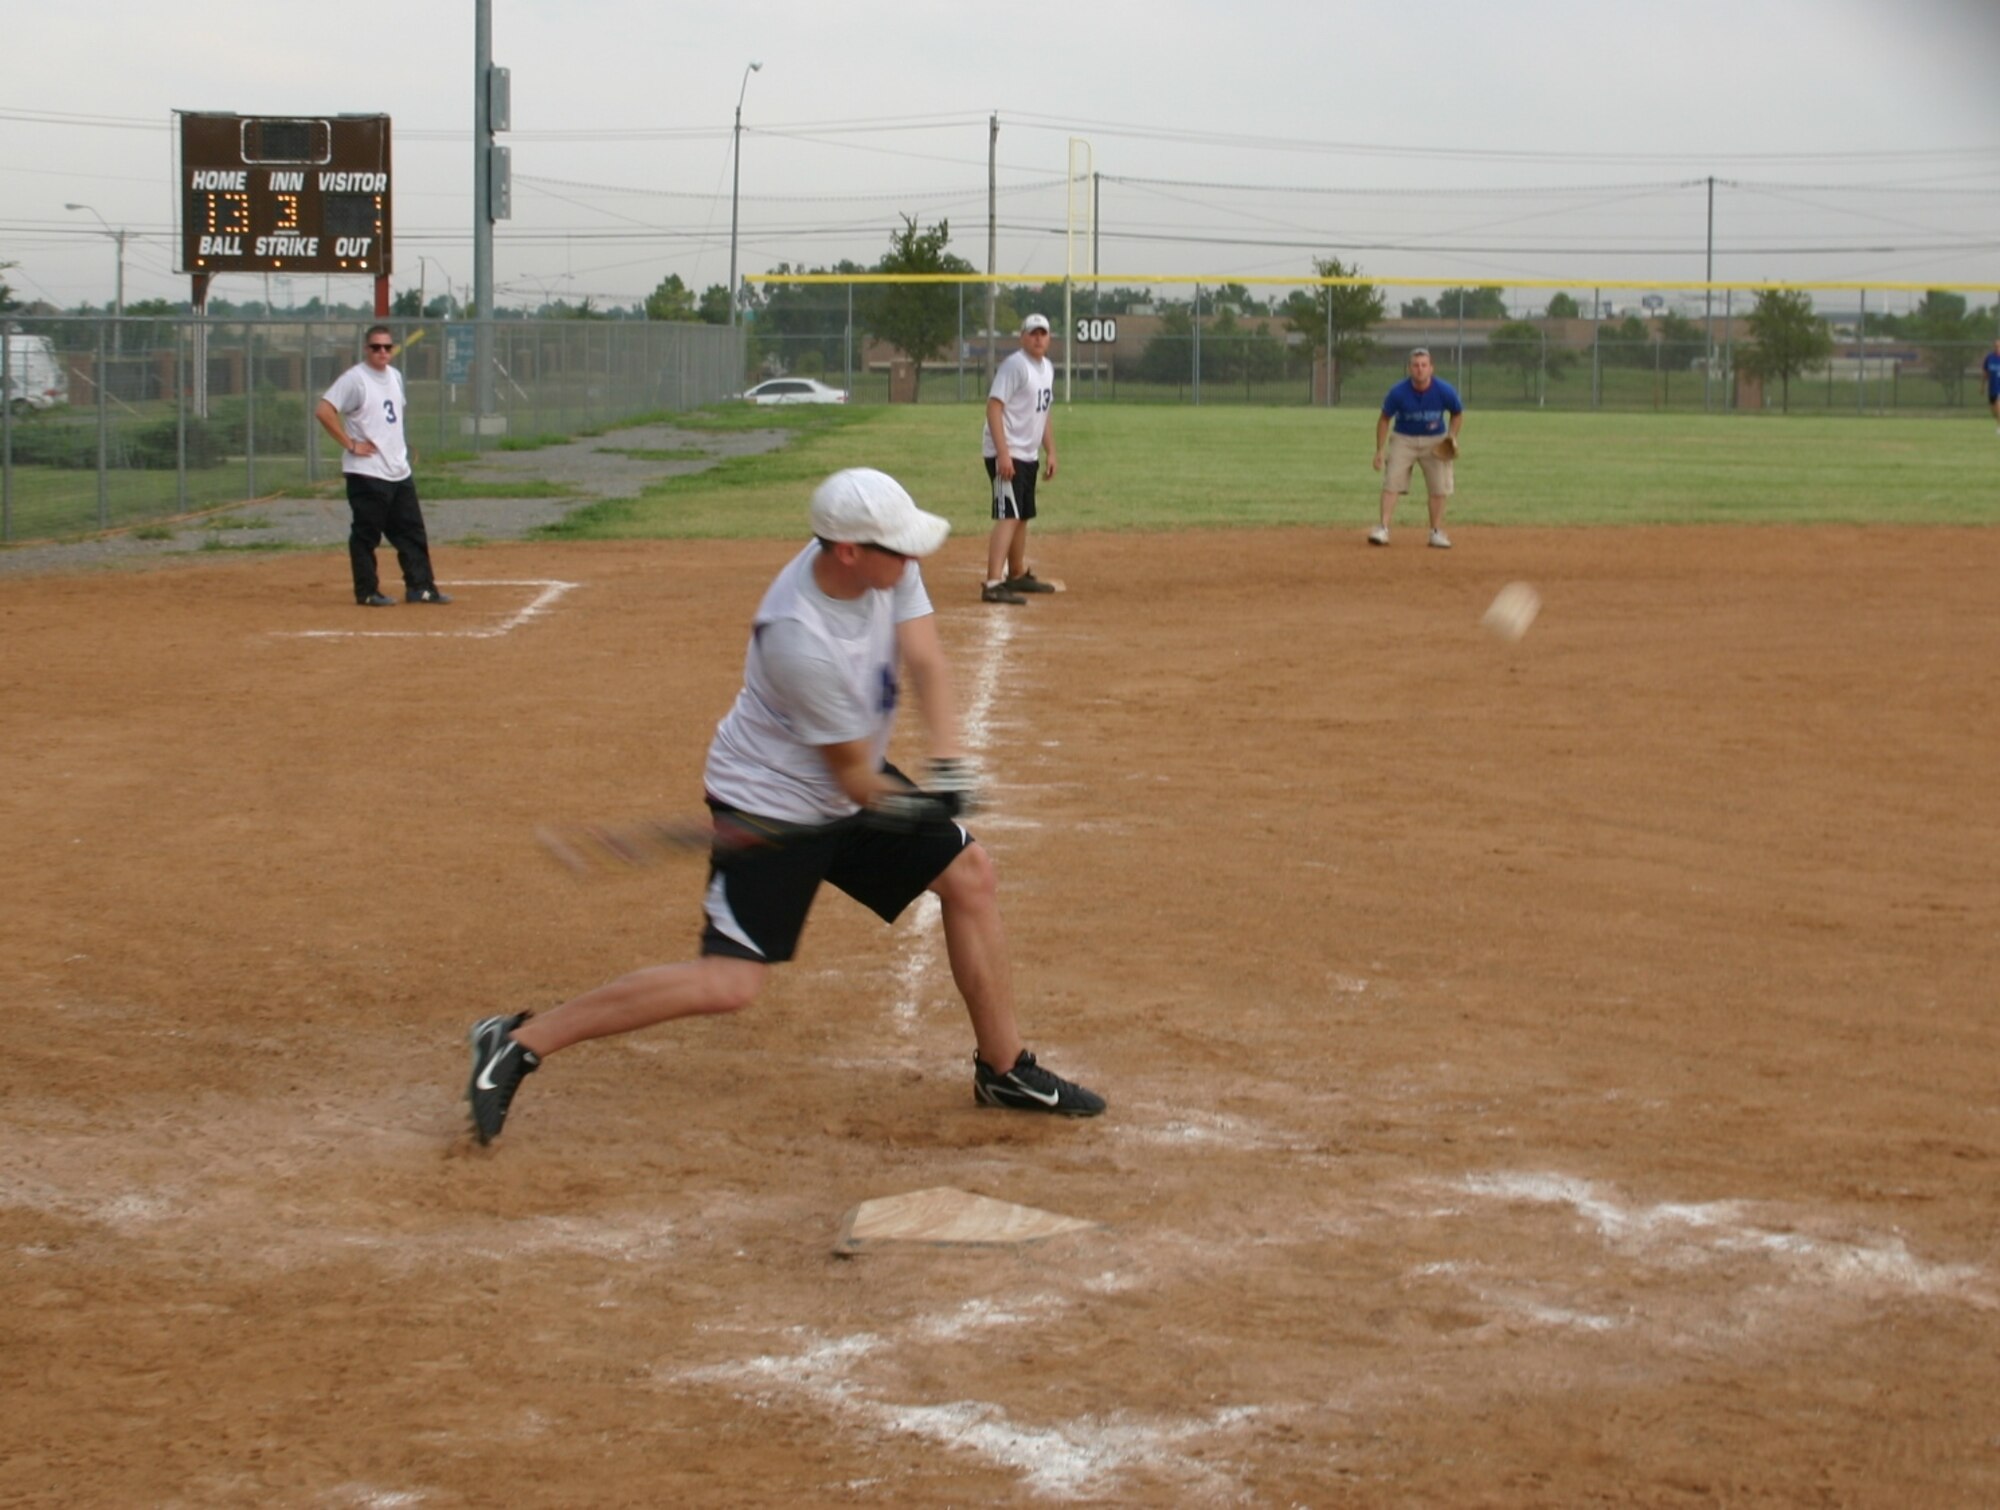 The American and Canadian teams competed in an American favorite, softball on September 9. Despite the Canadian team's valiant effort, the American team won the game, 27 to 8. Photo courtesy of Mr. Kenneth LaFayette.